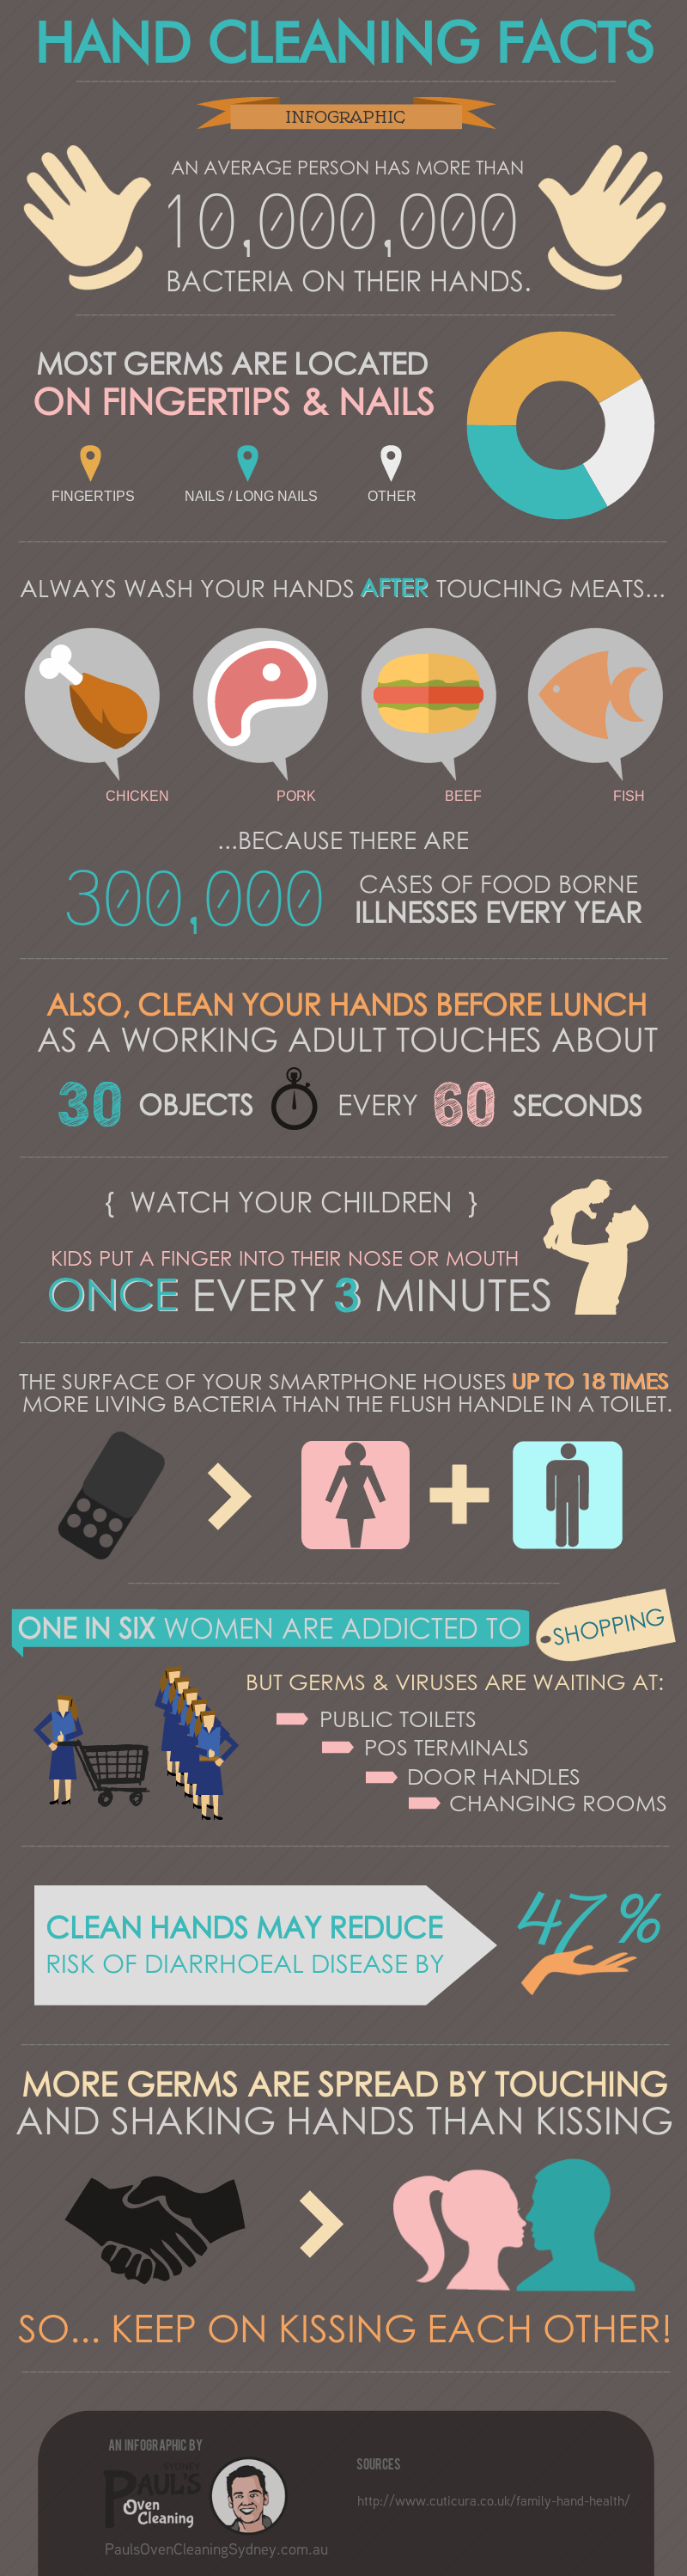 Hand Cleaning Facts